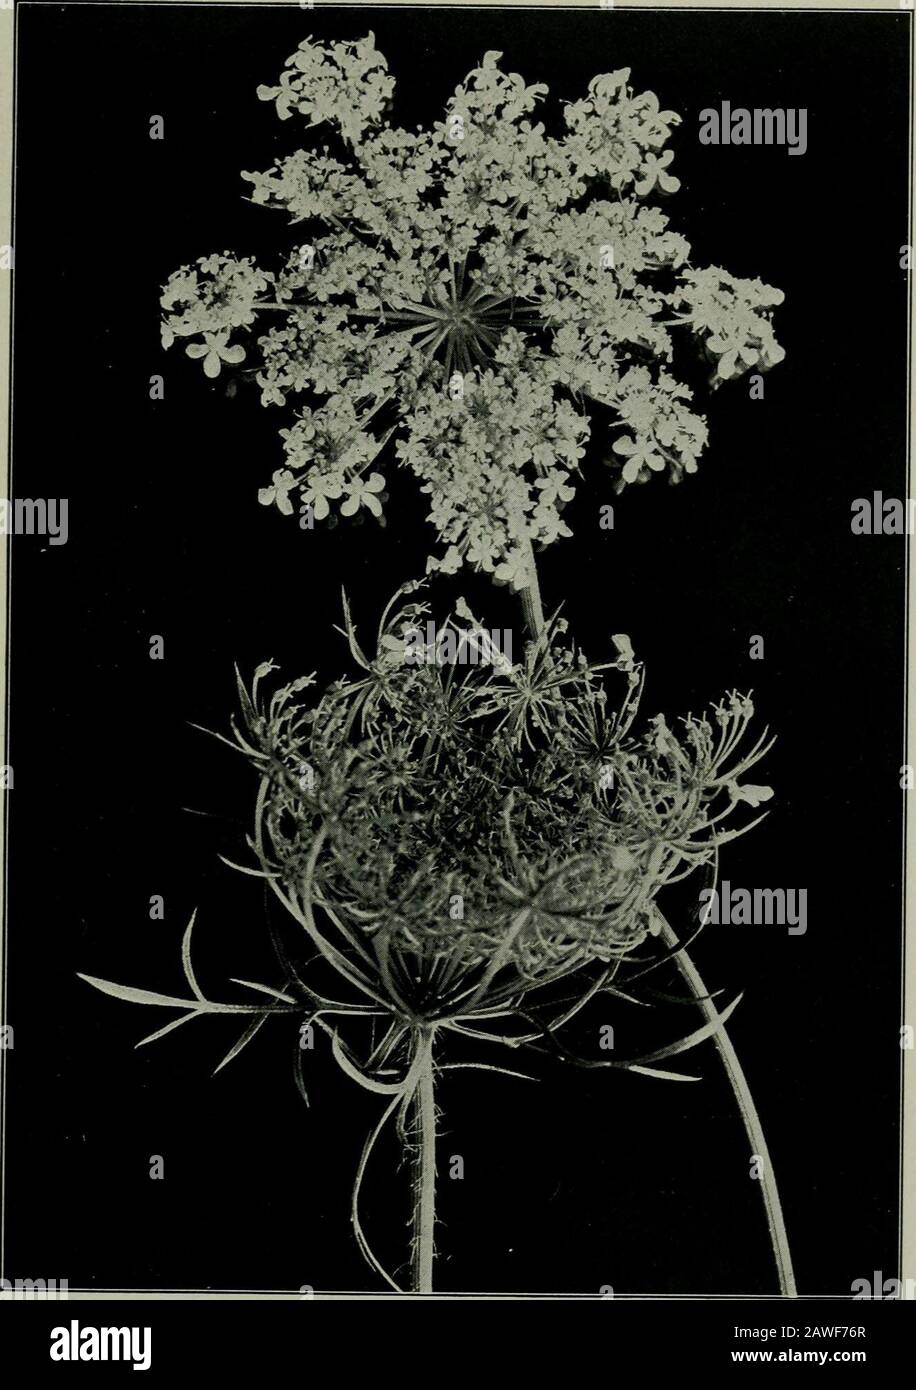 The flower and the bee; plant life and pollination . Fig. 109. Button-Bush. Cephalanthus occidentalisA handsome swamp-shrub with small white flowers in dense spherical heads. Fig. 110. Carrot. Dauciis Carota yicuousness is gained by the aggregation of many small white flowers in a level-topn(flower-clust er. In the lower figure the bird-nest formed by the cluster after it h Conspiiflogone to seed is showa ed THE FLOWER AND THE BEE The largest tree-flowers known belong to the Magnolia.One Southern species has a white flower, with a purple centre,which measures ten inches across. Their effect in Stock Photo